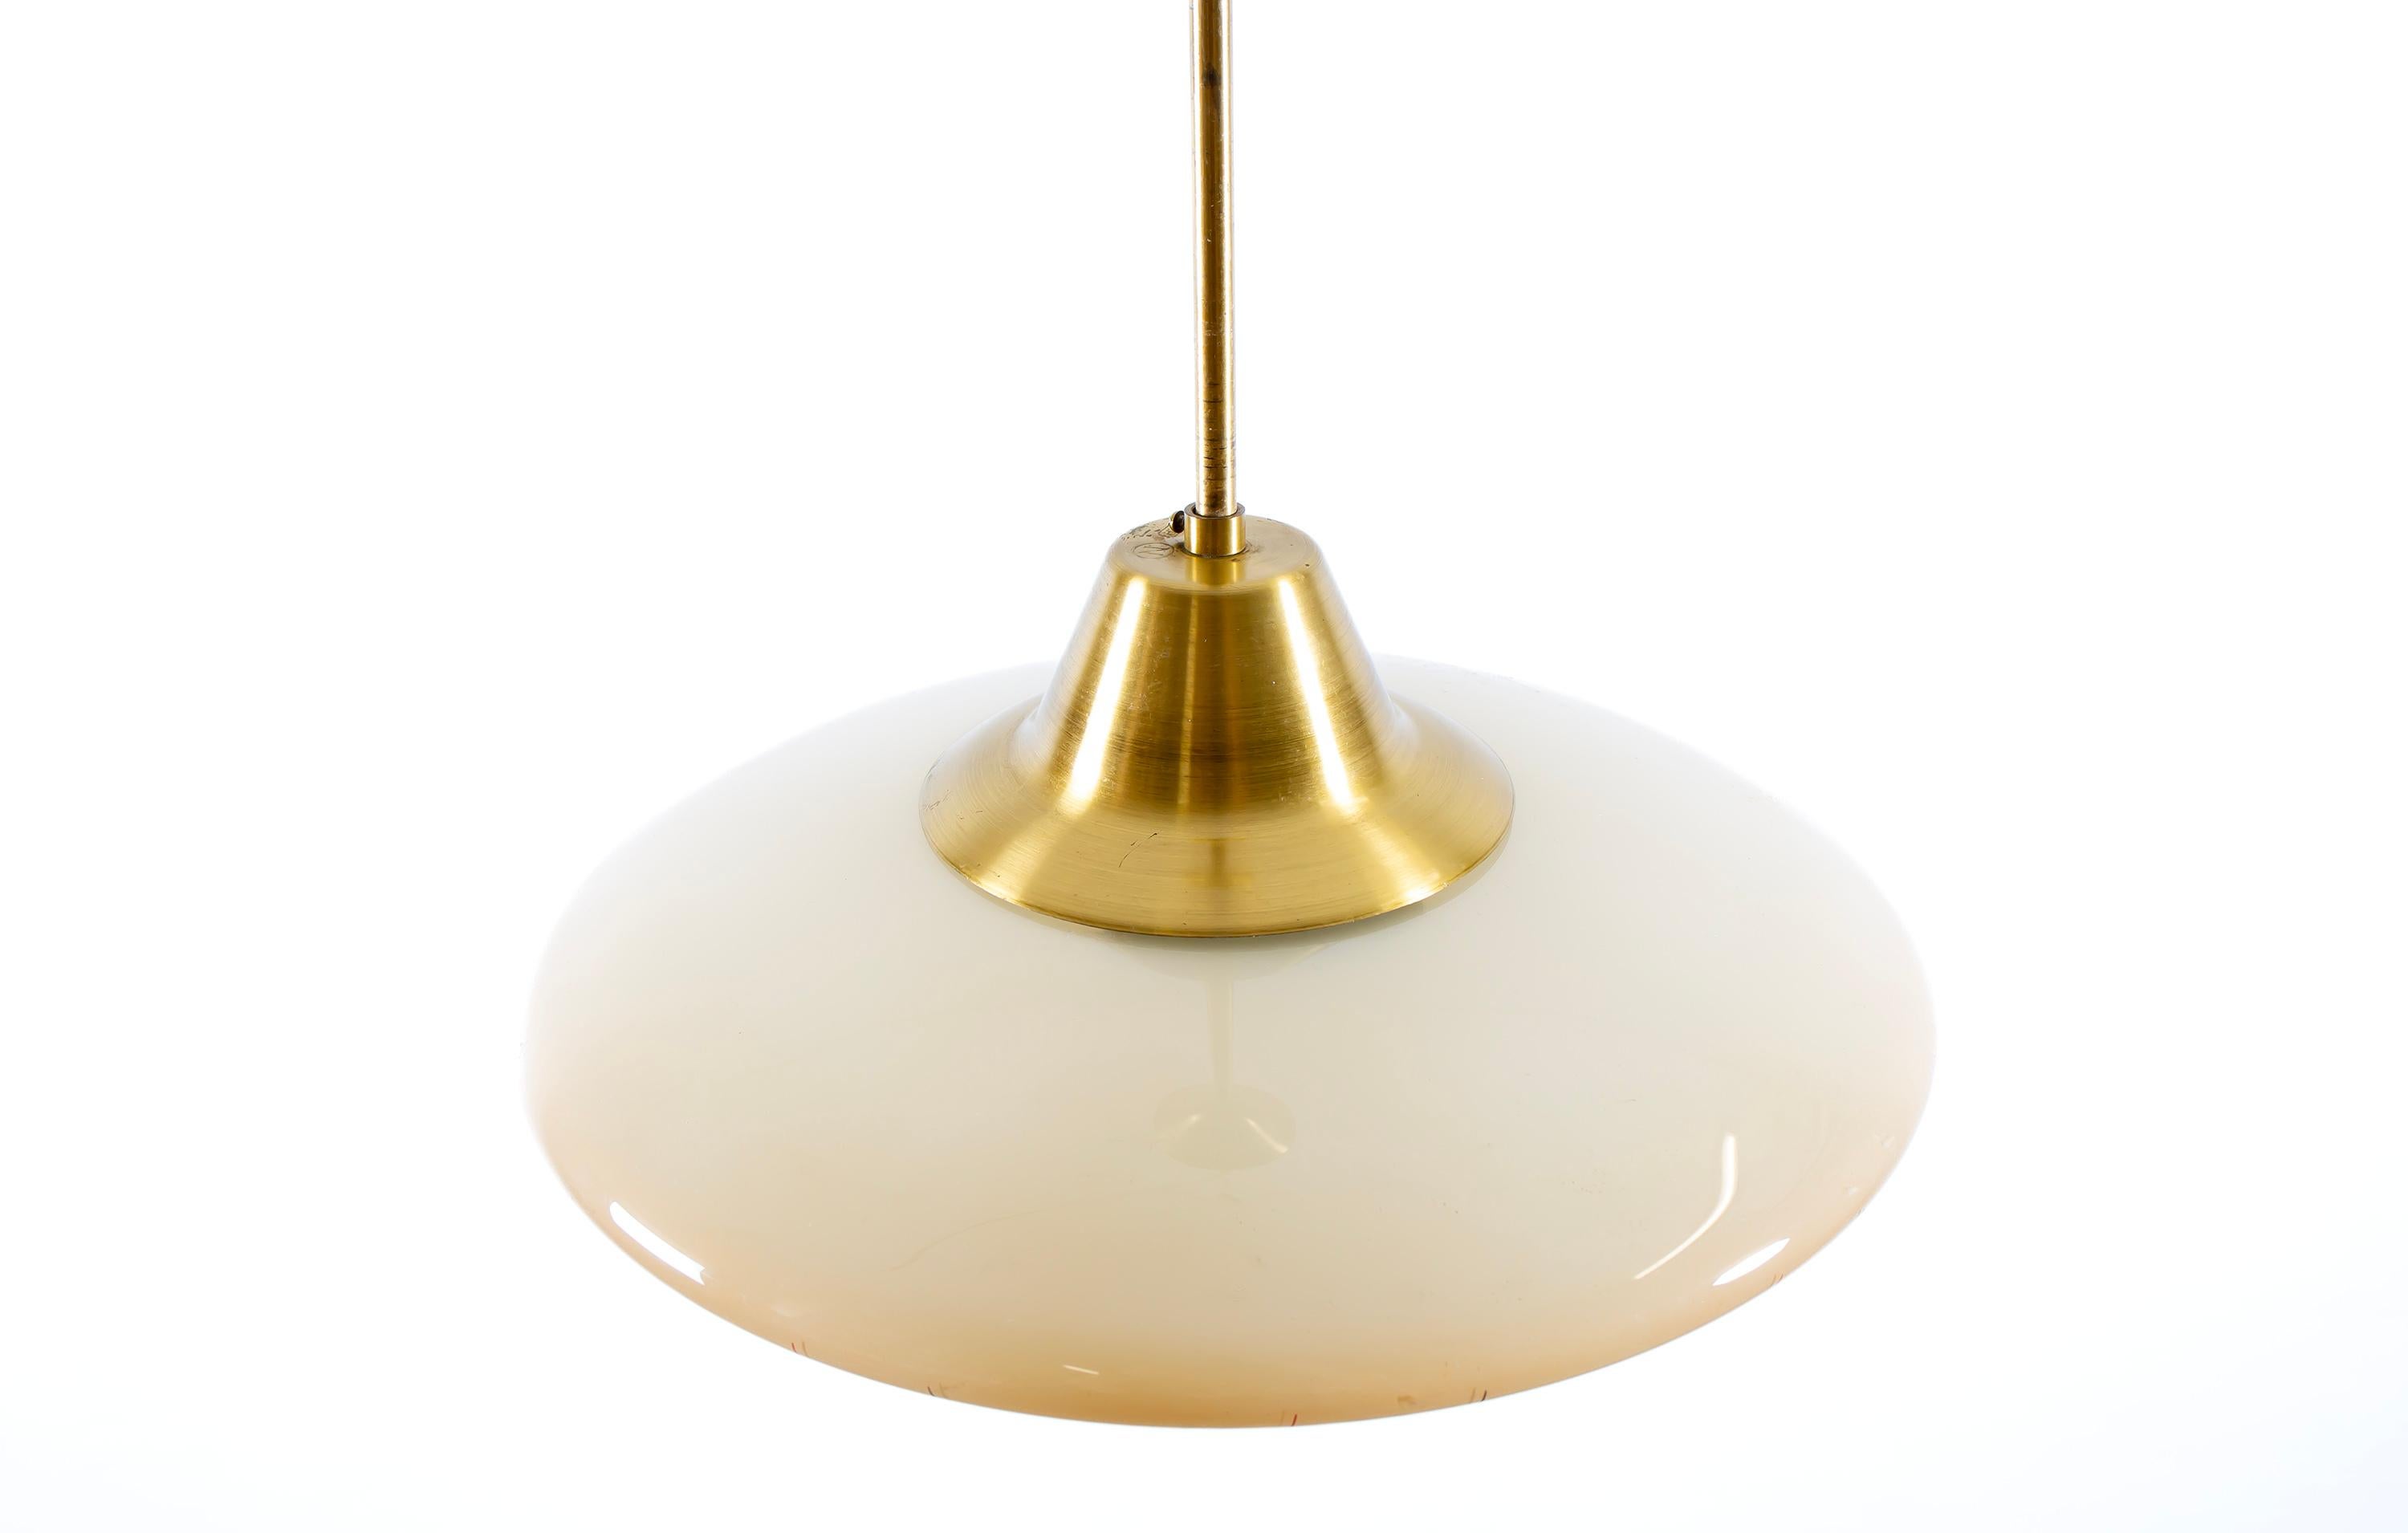 Mid-20th Century Scandinavian Mid Century Ceiling Light, Norway, 1950s For Sale